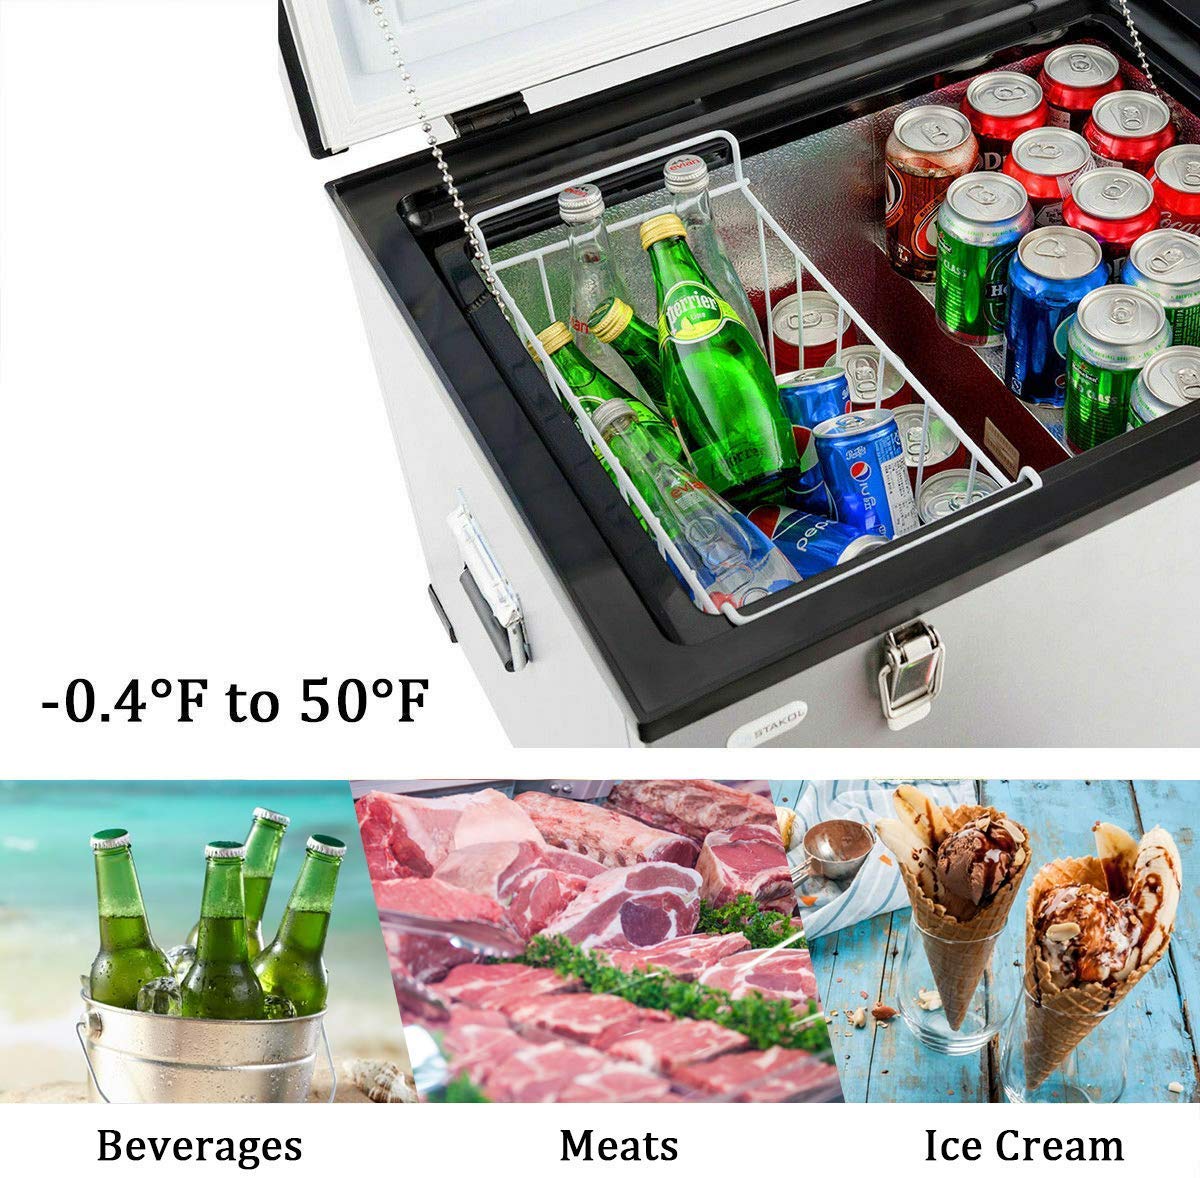 ReunionG 63-Quart Chest Freezer with LCD Display, Temperature-Adjustable Mini Vehicle Refrigerator with Removable Basket and Handles, Portable Electric Cooler Fridge for Home, RVs and Office